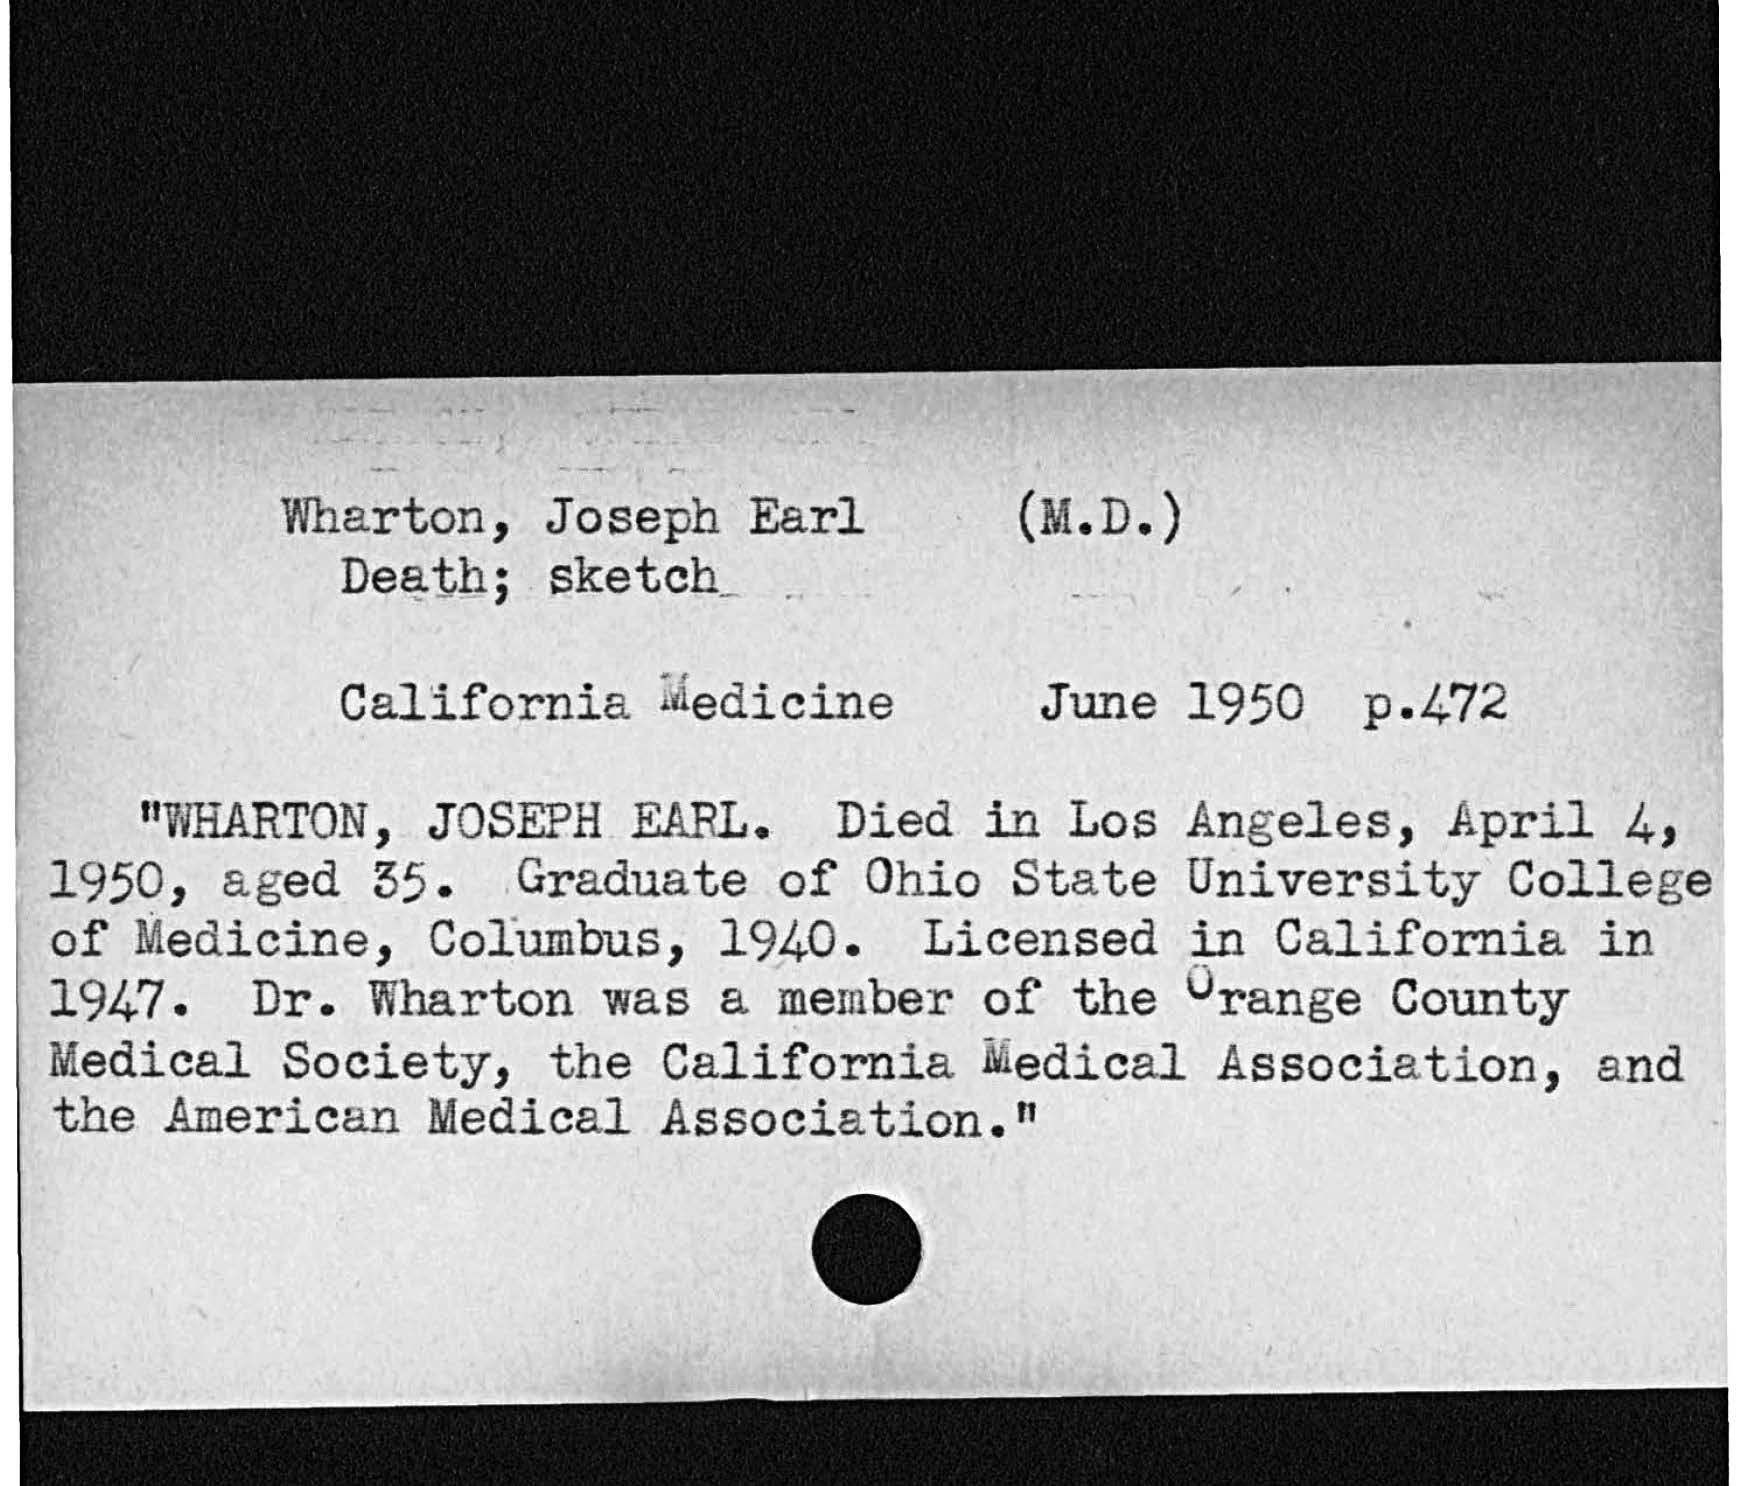 Wharton, Joseph Earl M. D.Death; sketch.California medicine June 1950 p. 472WHARTON JOSEPH EARL. Died in Los Angeles, April 4,aged 55 Graduate of Ohio State University Collegeof Medicine, Columbus, 1940 Licensed California in1947 Dr. Wharton was a member of the Orange CountyMedical Society, the California Medical Association, andthe American Medical Association.   1950,